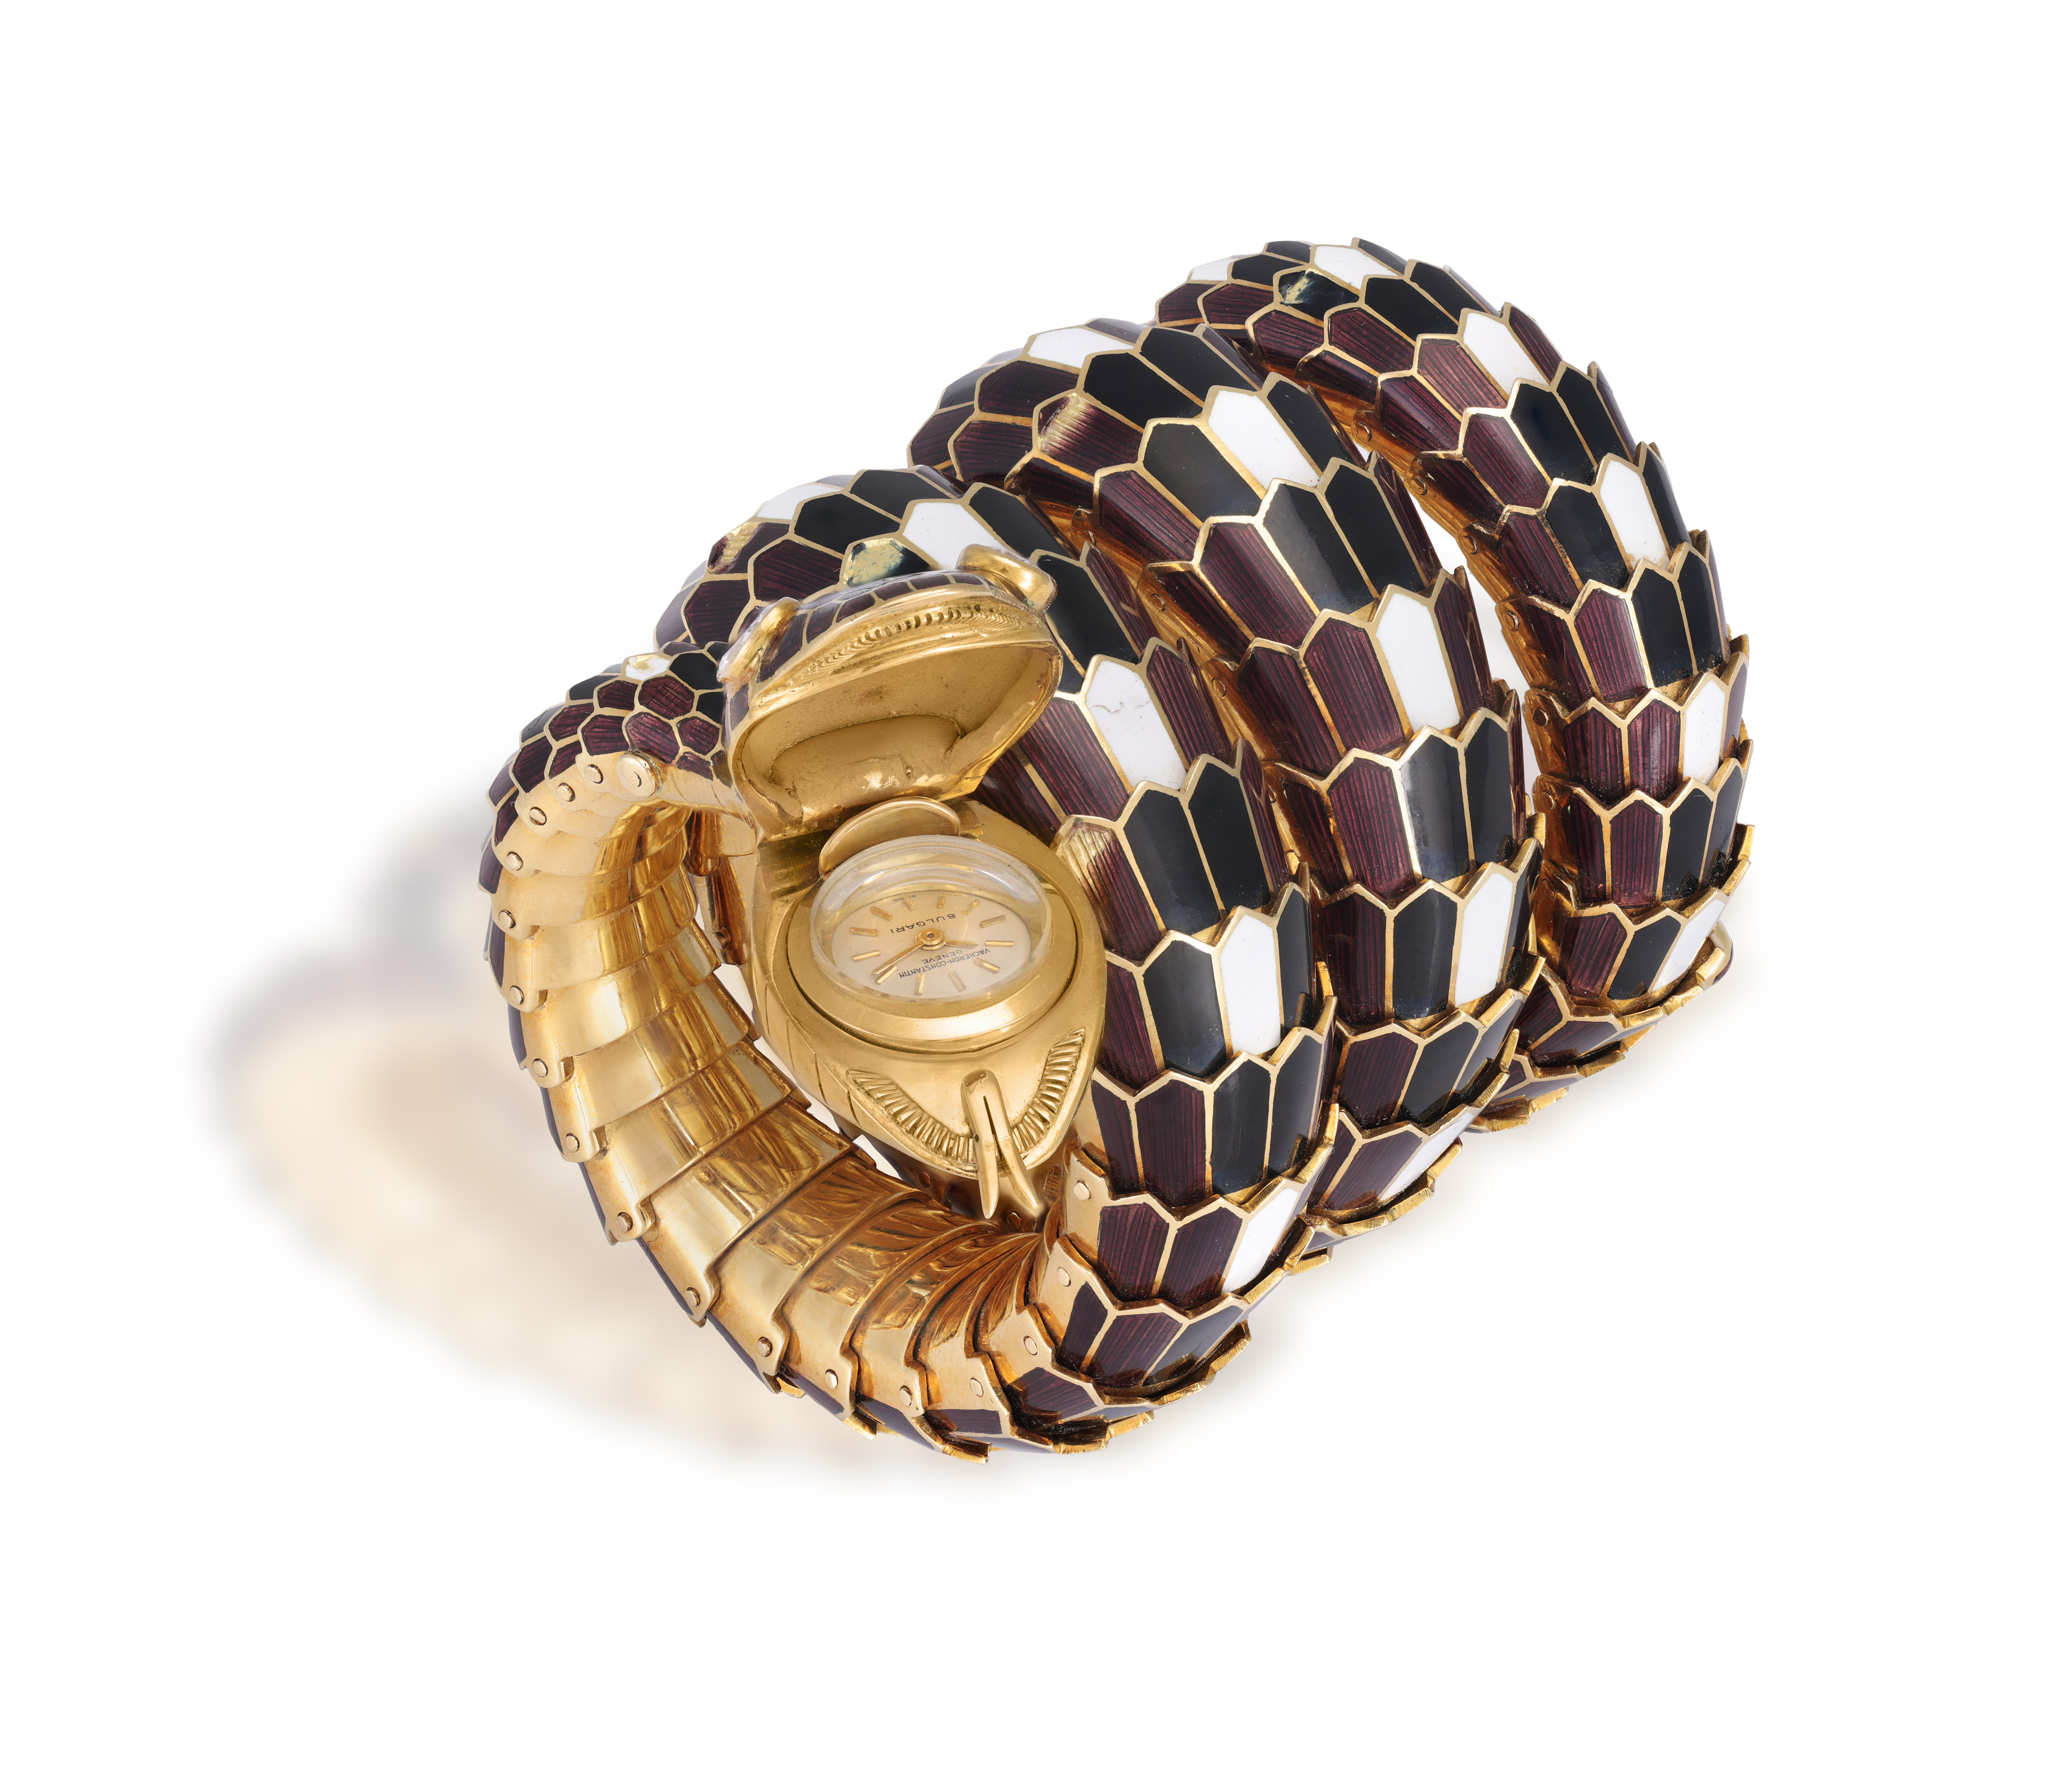 A RARE AND COLLECTIBLE 'SERPENTI' BRACELET WATCH, BY BULGARI, CIRCA 1960 Designed as a snake, the - Image 5 of 14